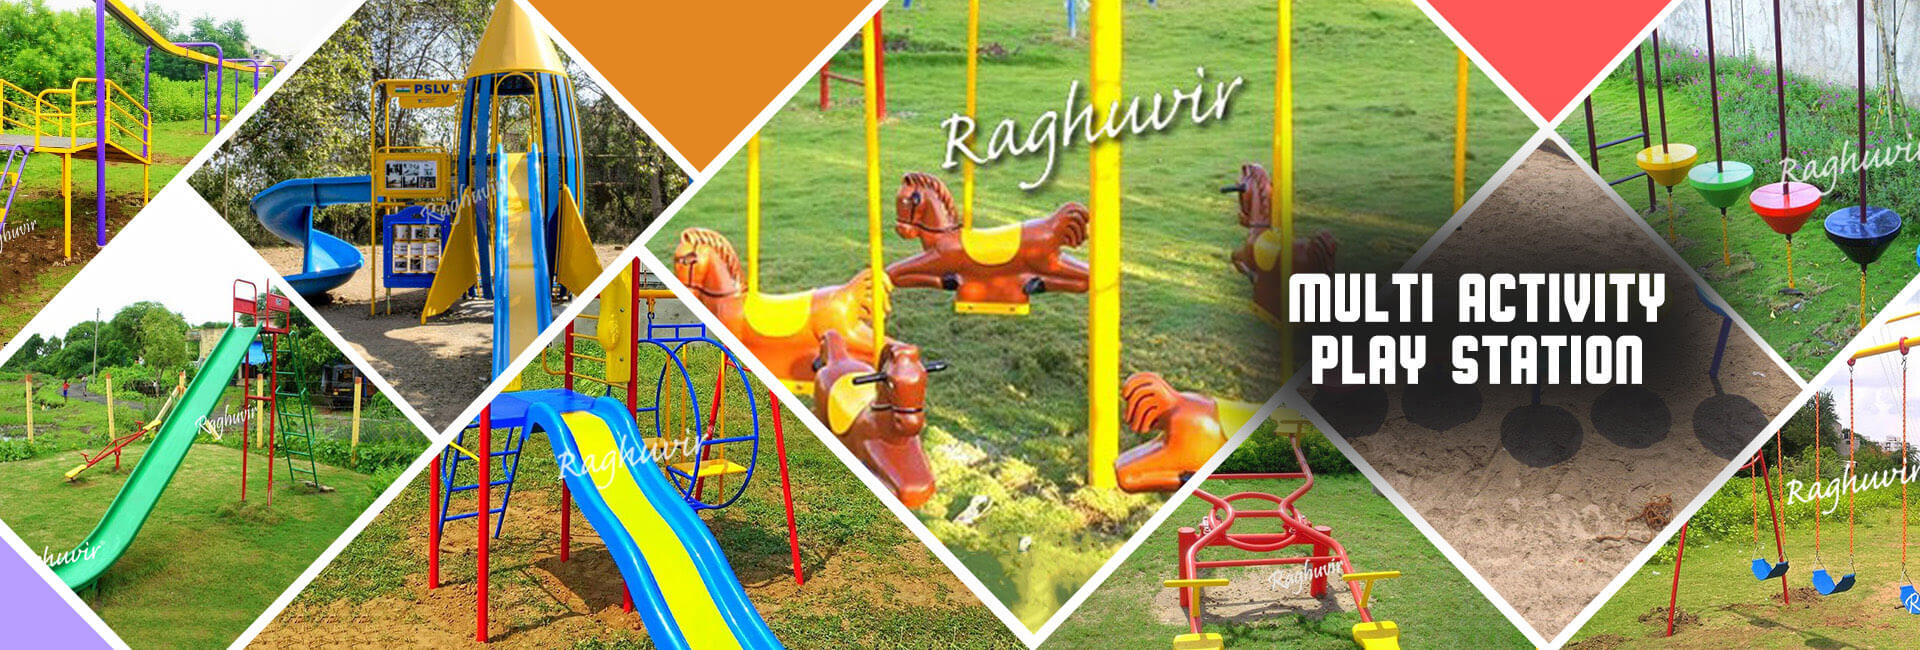 Play Ground Equipments Manufacturre, Supplier and Exporter in Ahmedabad, Gujarat, India